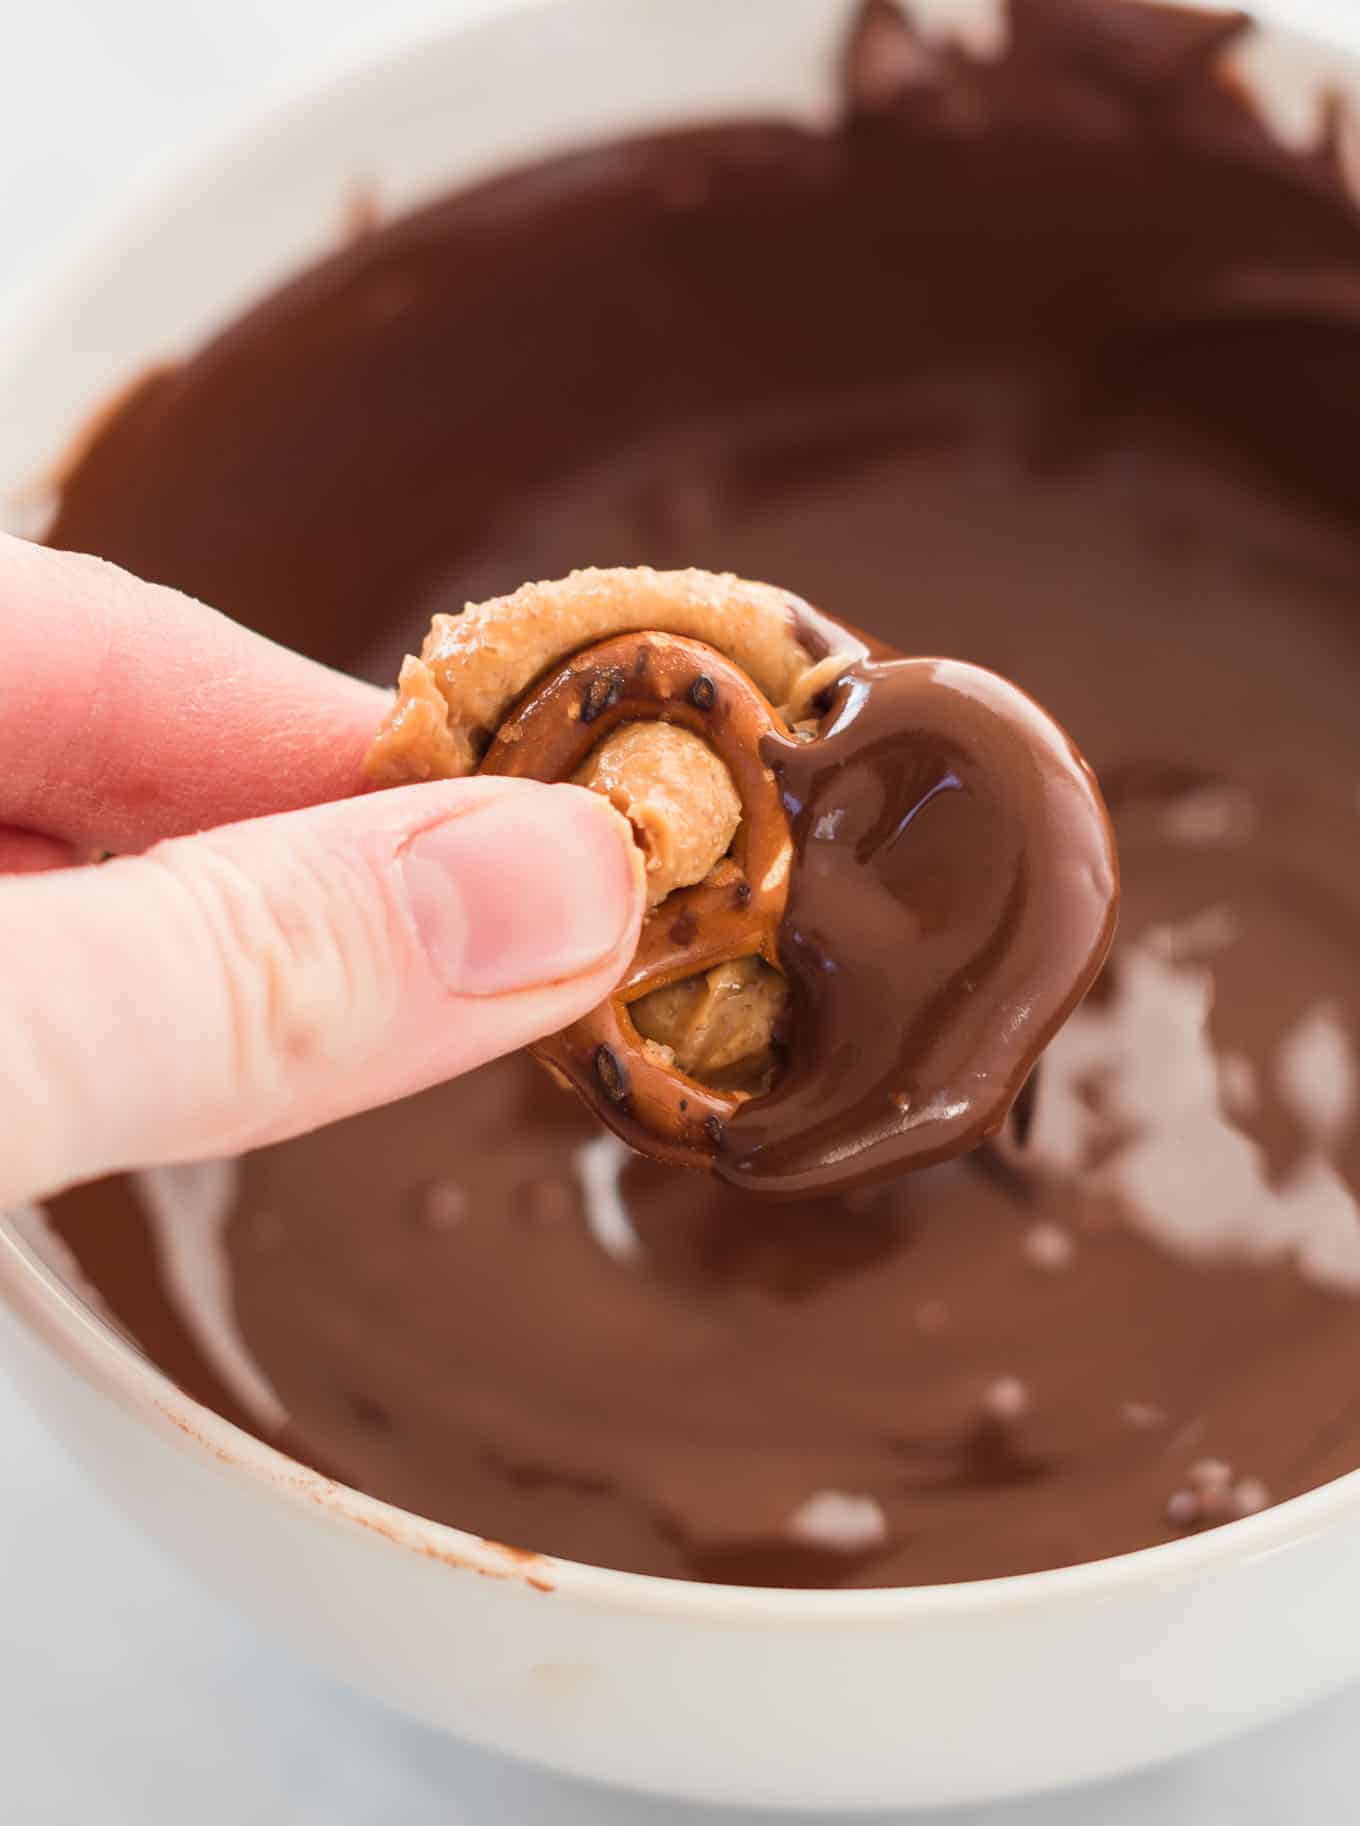 peanut butter stuffed pretzel dipped in melted chocolate